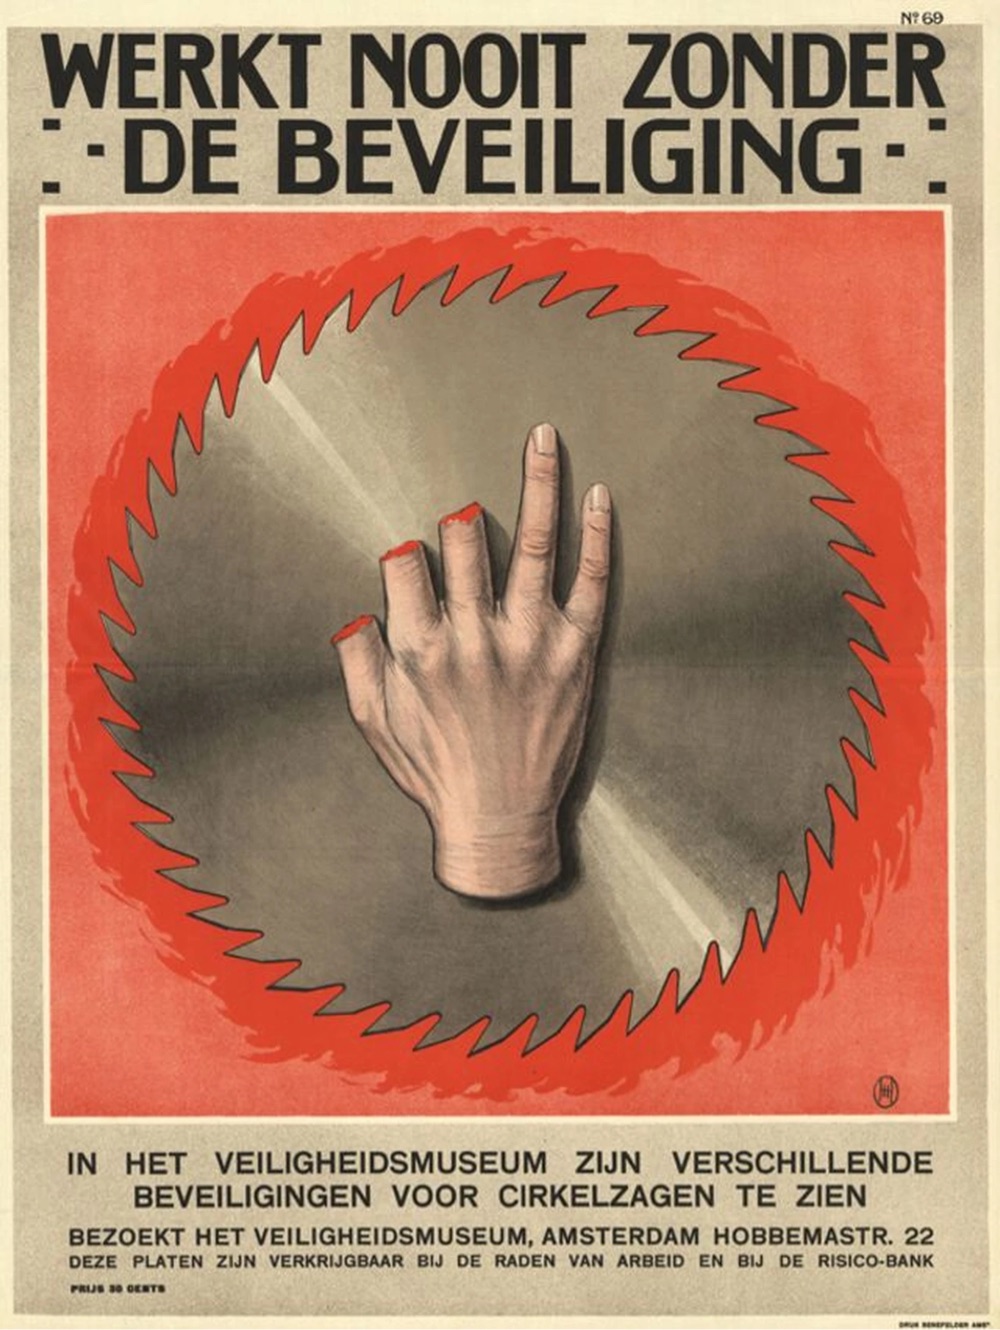 vintage Dutch safety poster showing a saw blade and a hand missing some fingers